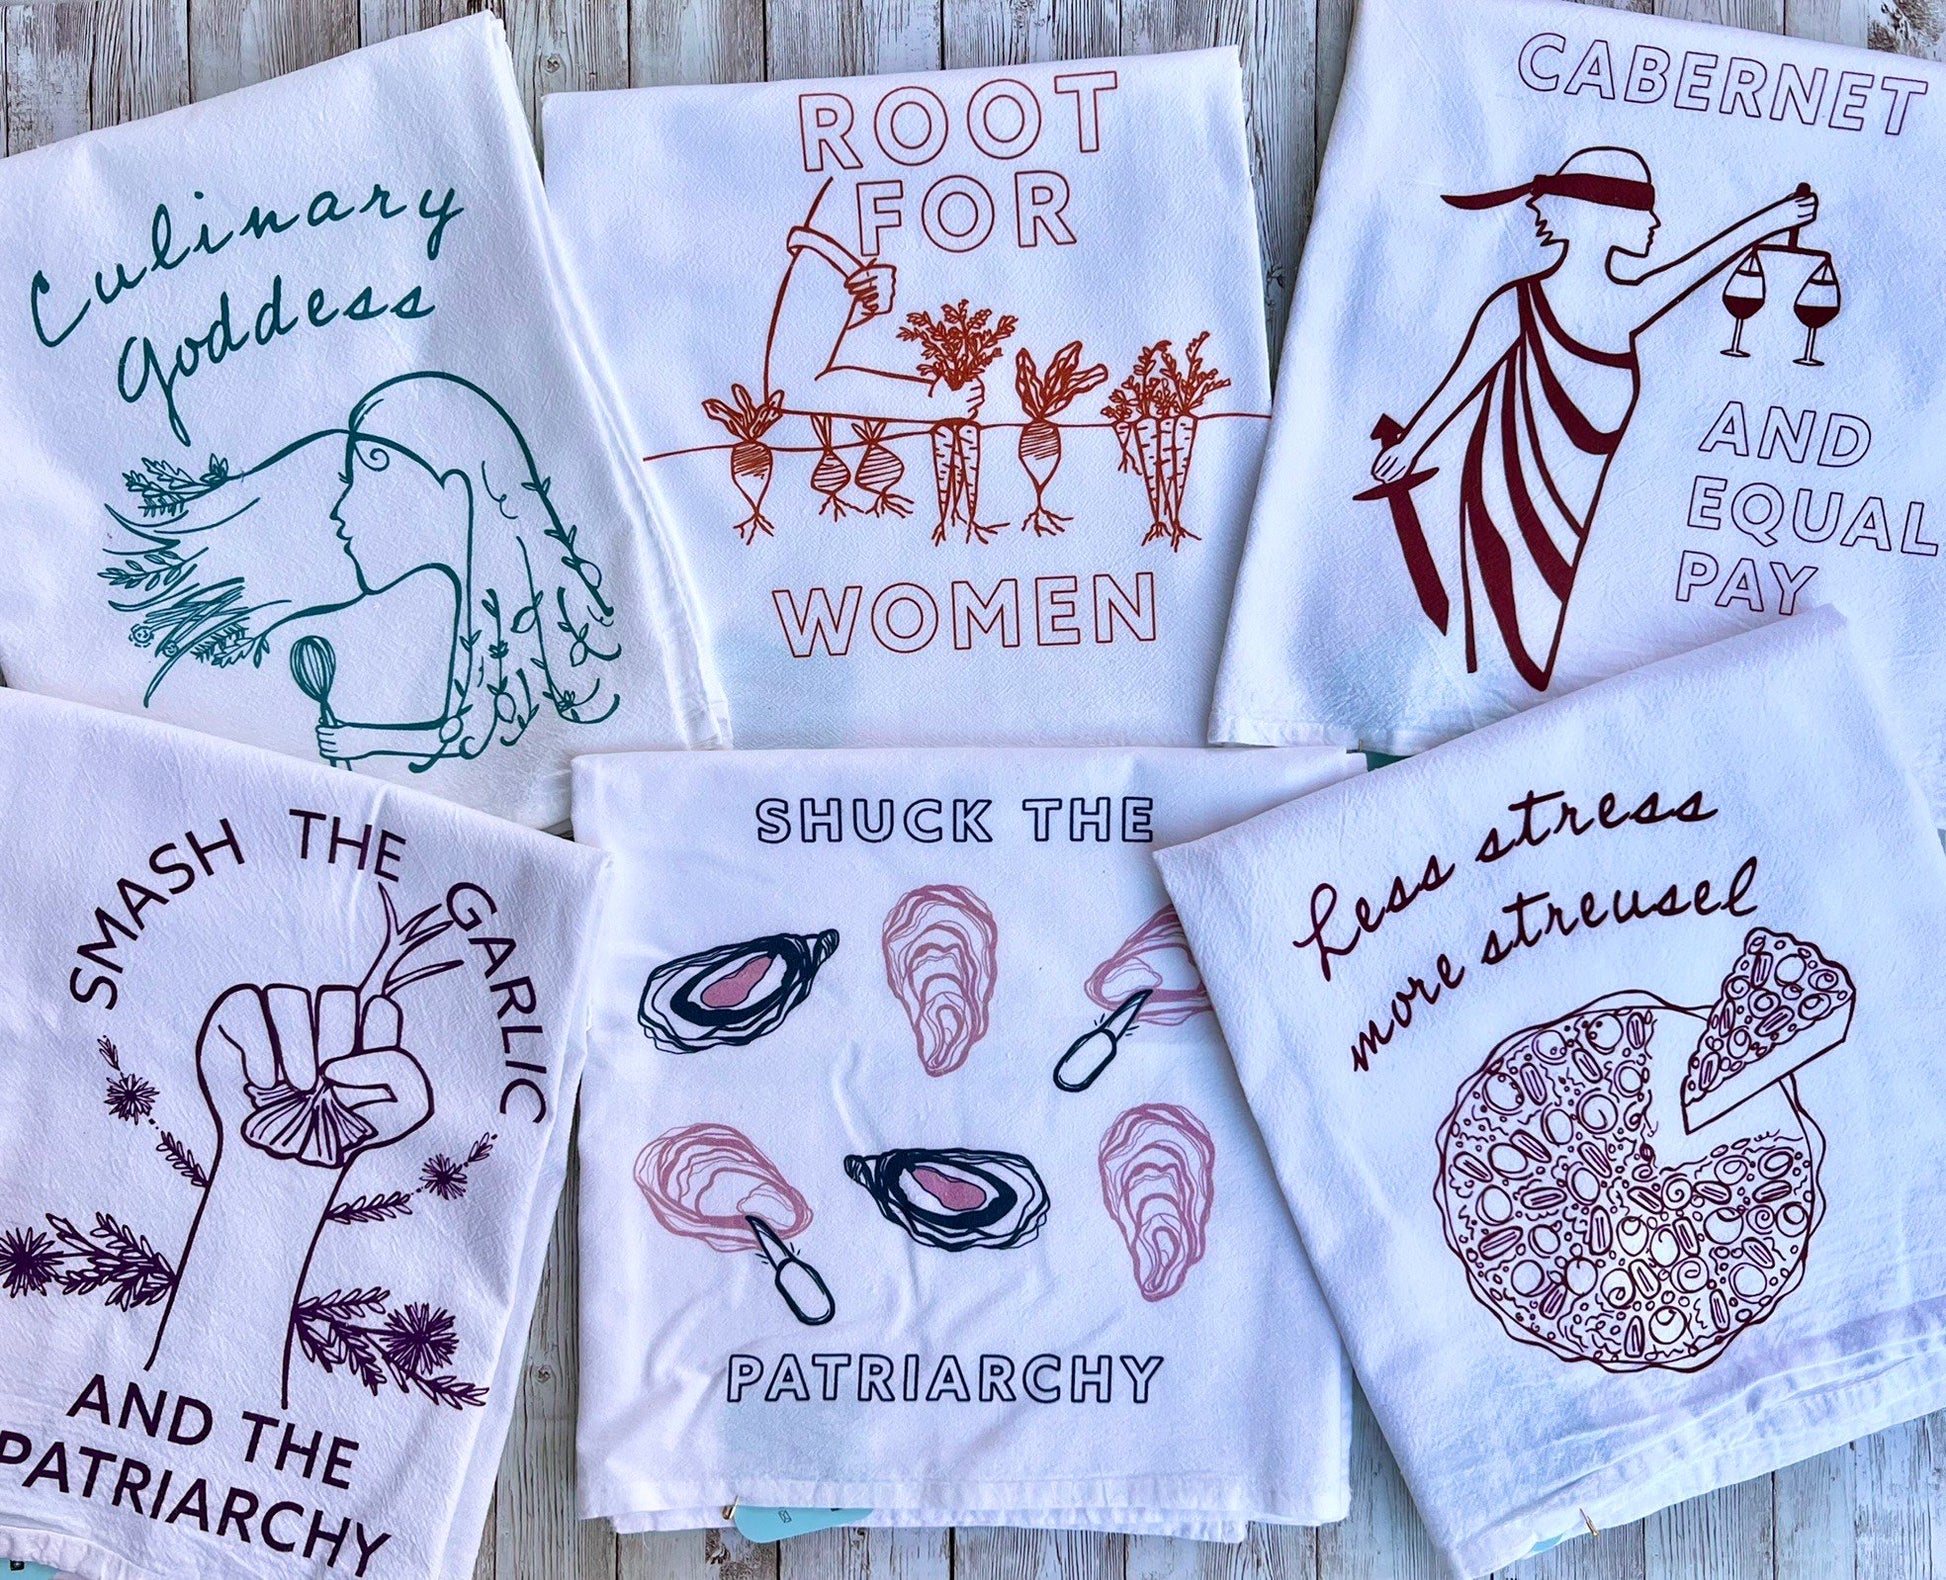 6 white tea towels with varying designs and messages